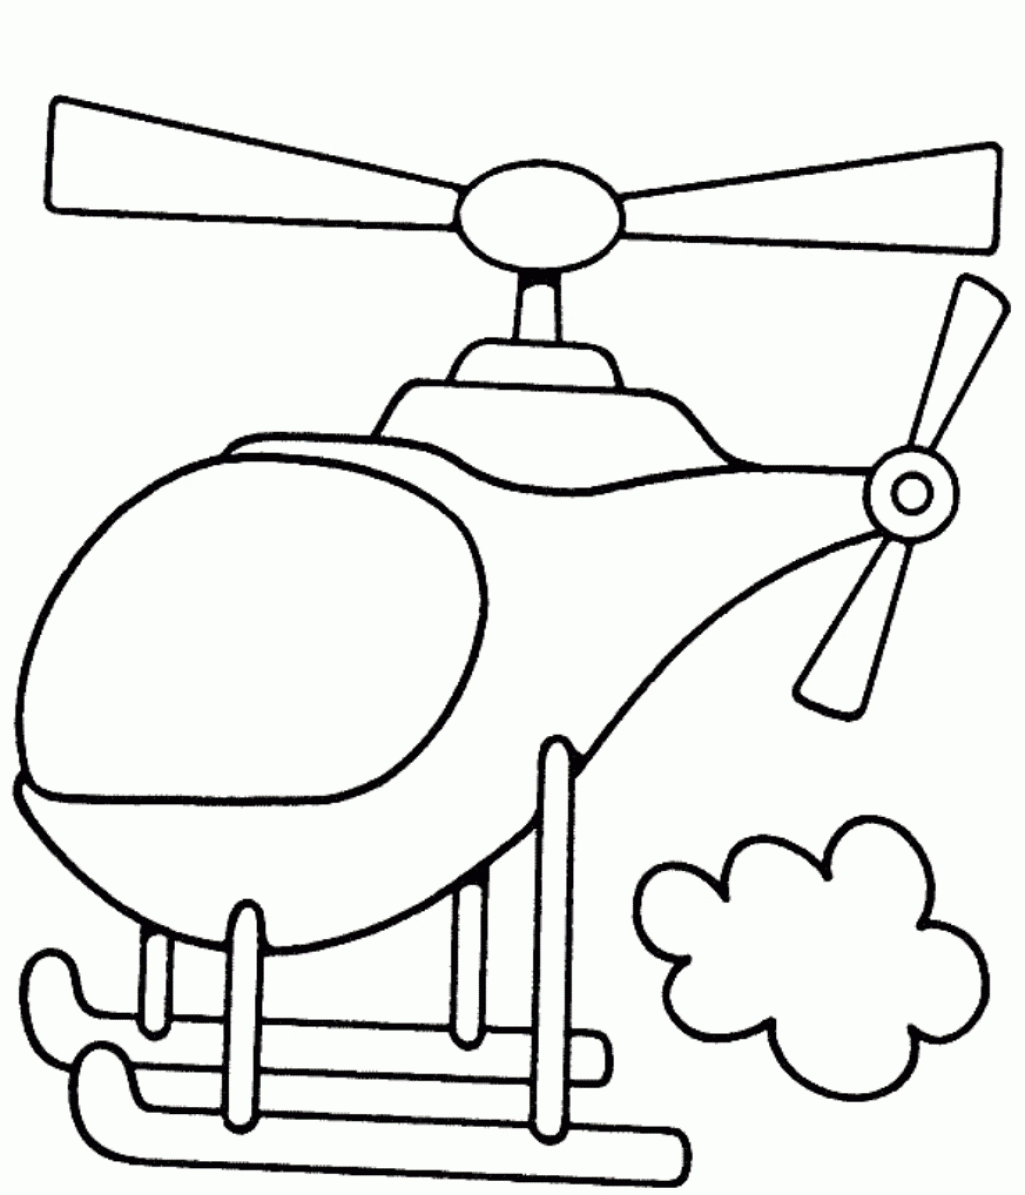 free helicopter coloring pages for preschool Coloring4free